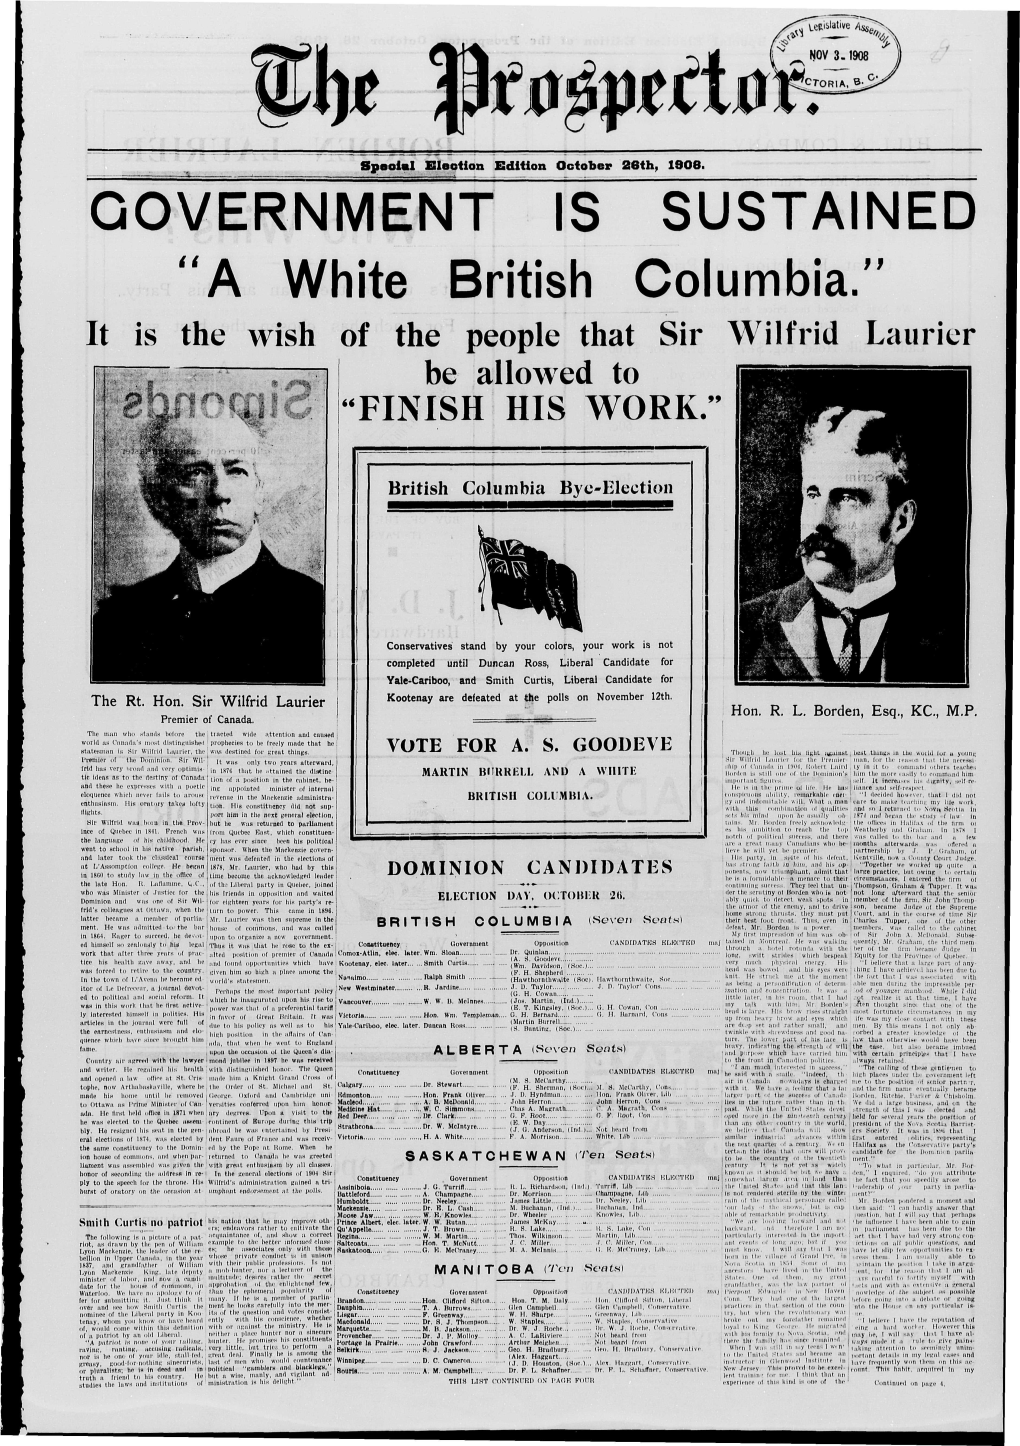 GOVERNMENT IS SUSTAINED Ti a White British Columbia